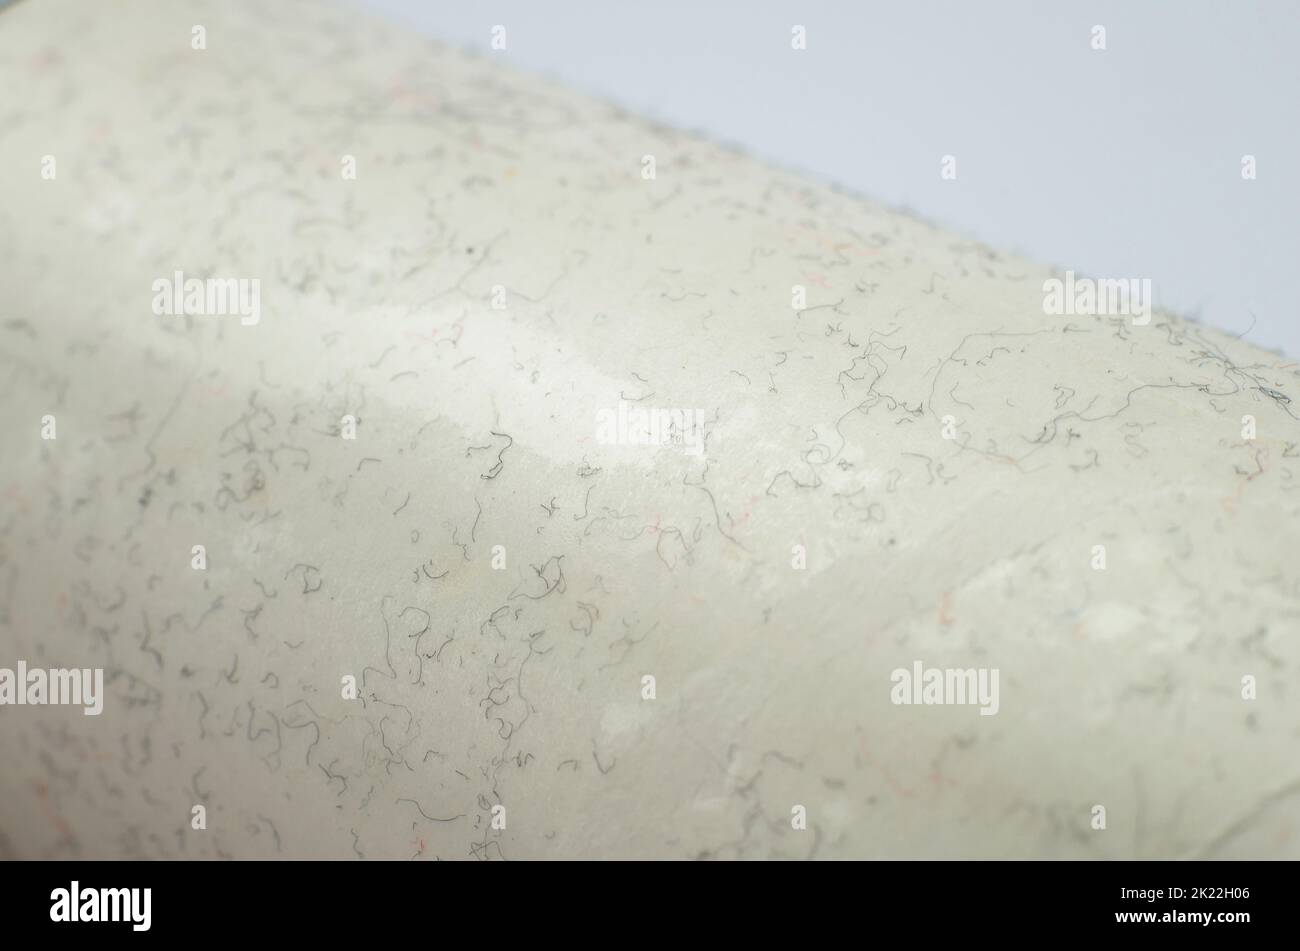 Macro photo of dust and lint on a special sticky surface Stock Photo